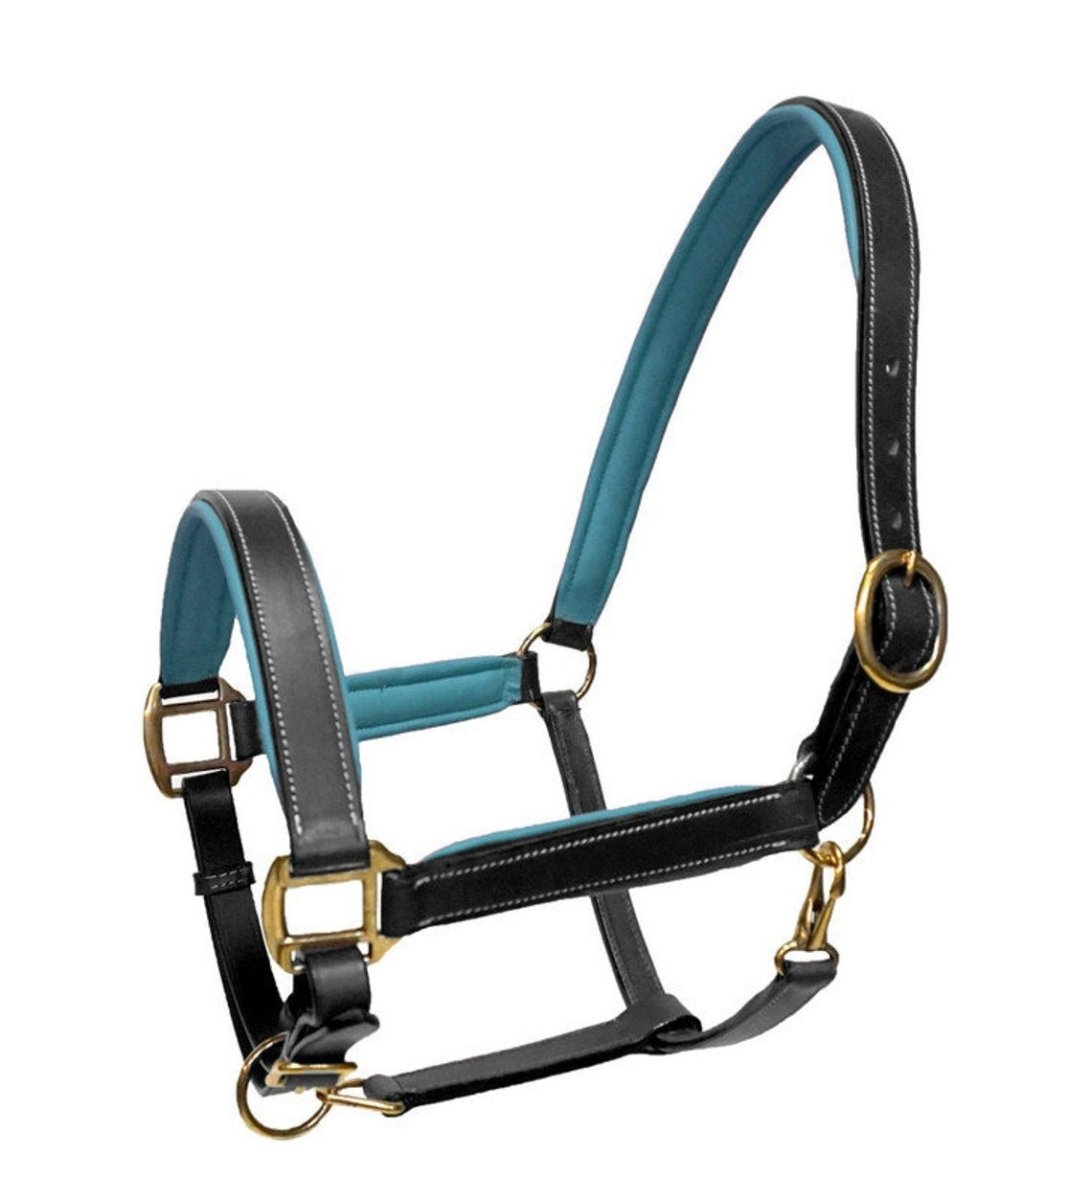 Brass Hardware Teal Padding Leather Halter - Equiluxe Tack